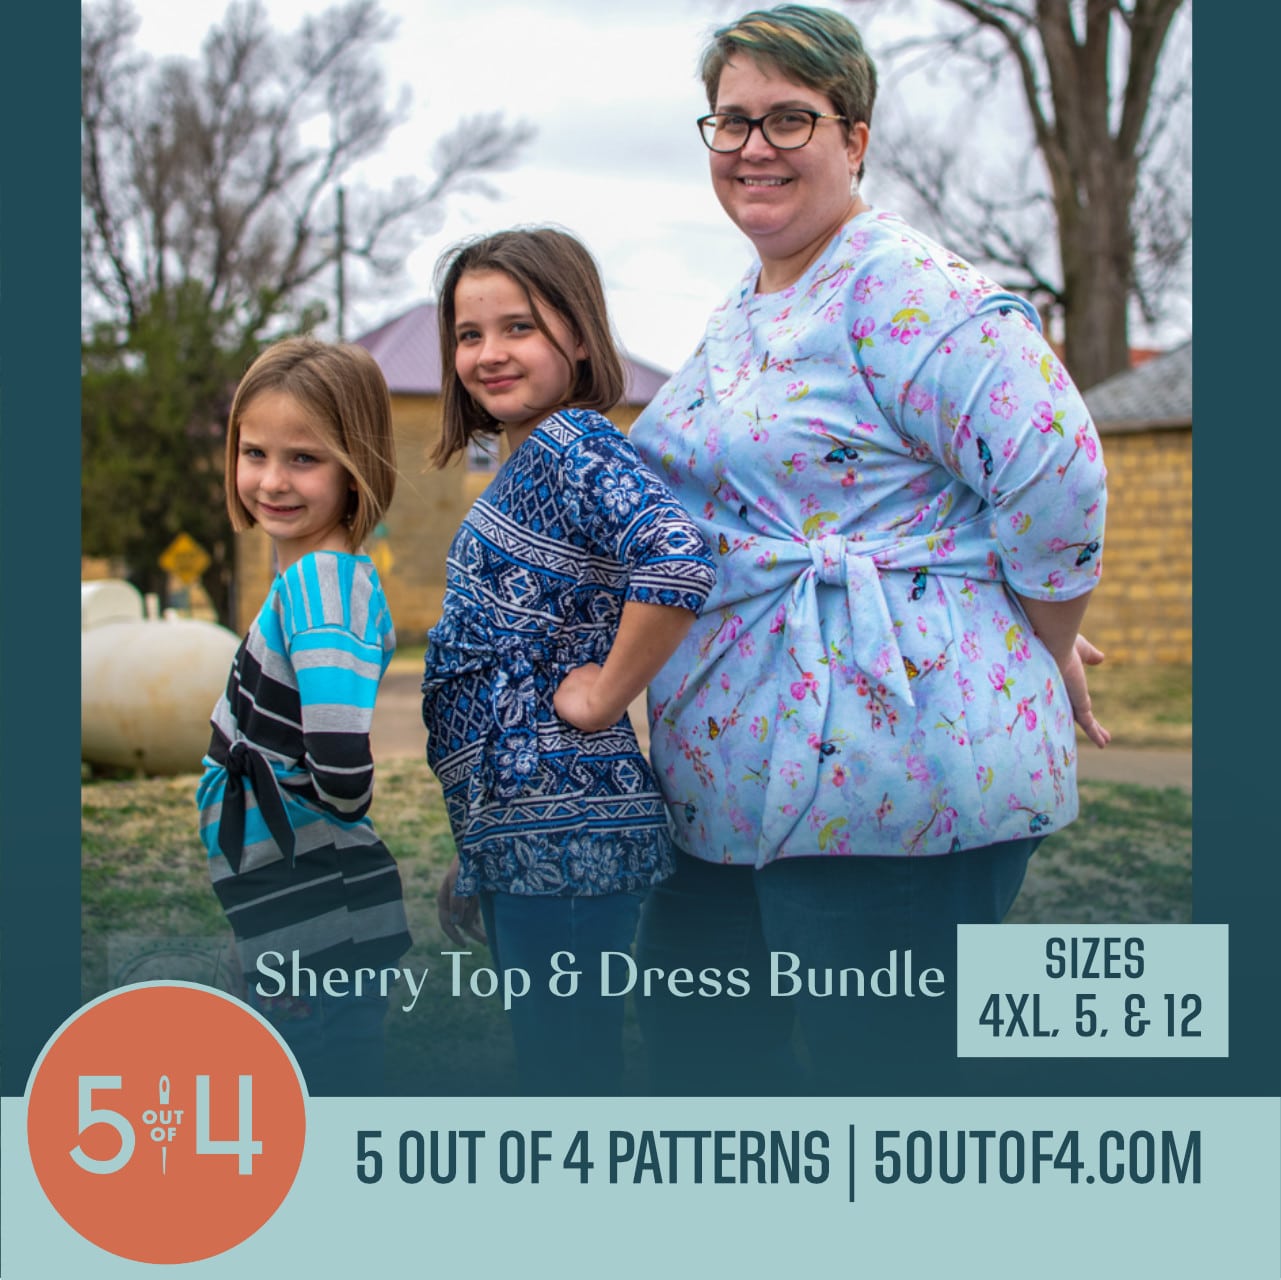 Sherry Top and Dress Bundle - 5 out of 4 Patterns